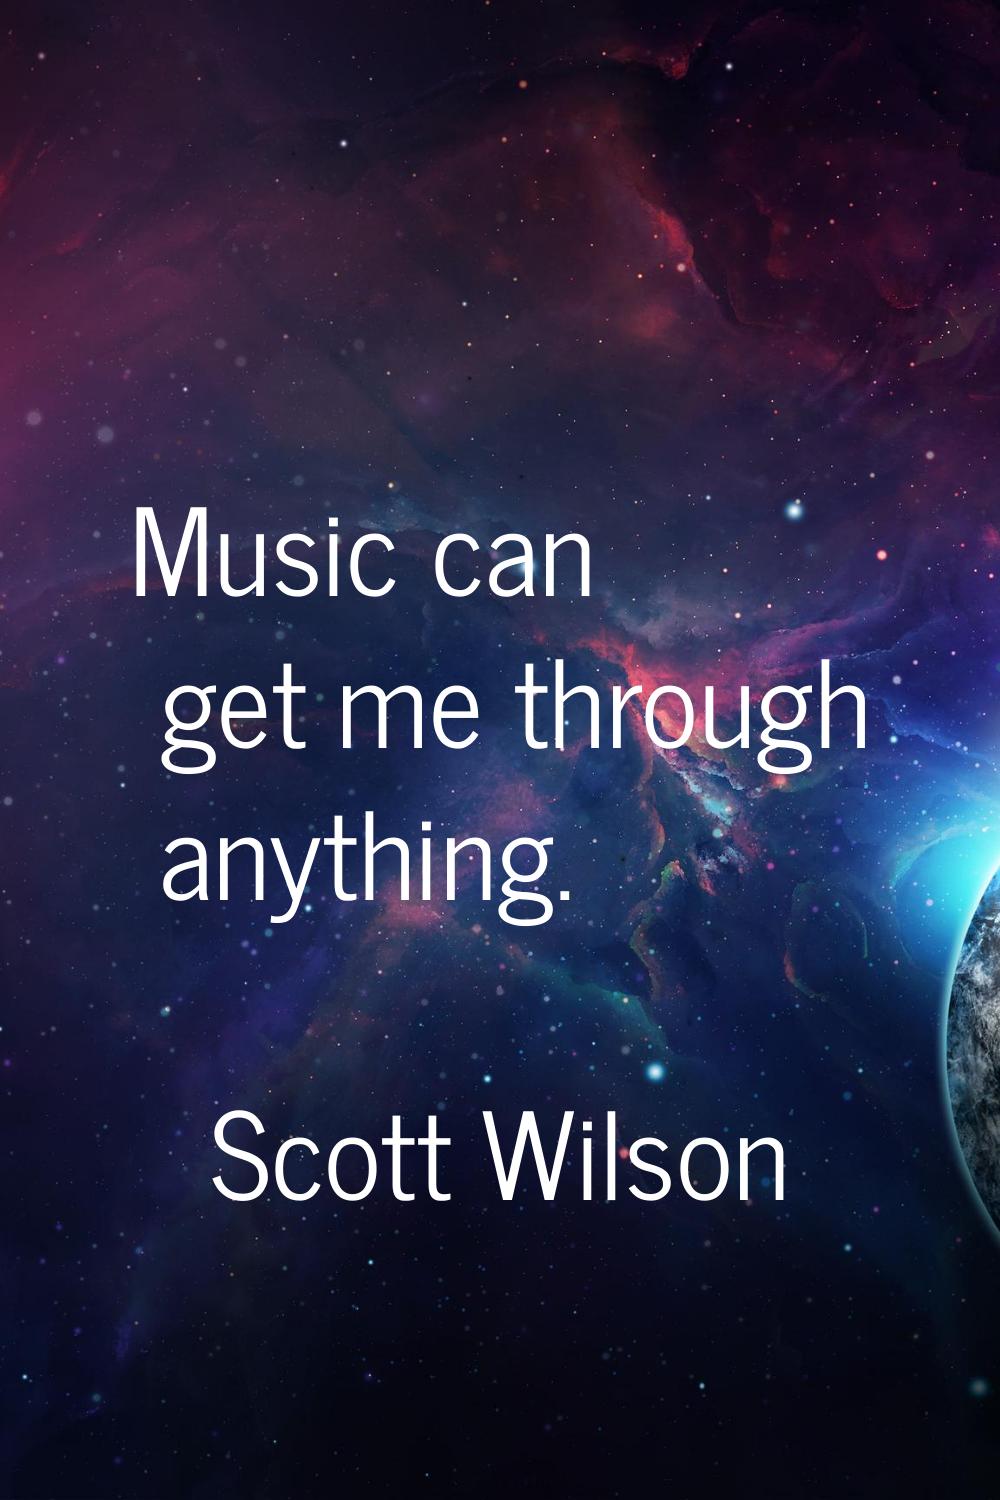 Music can get me through anything.